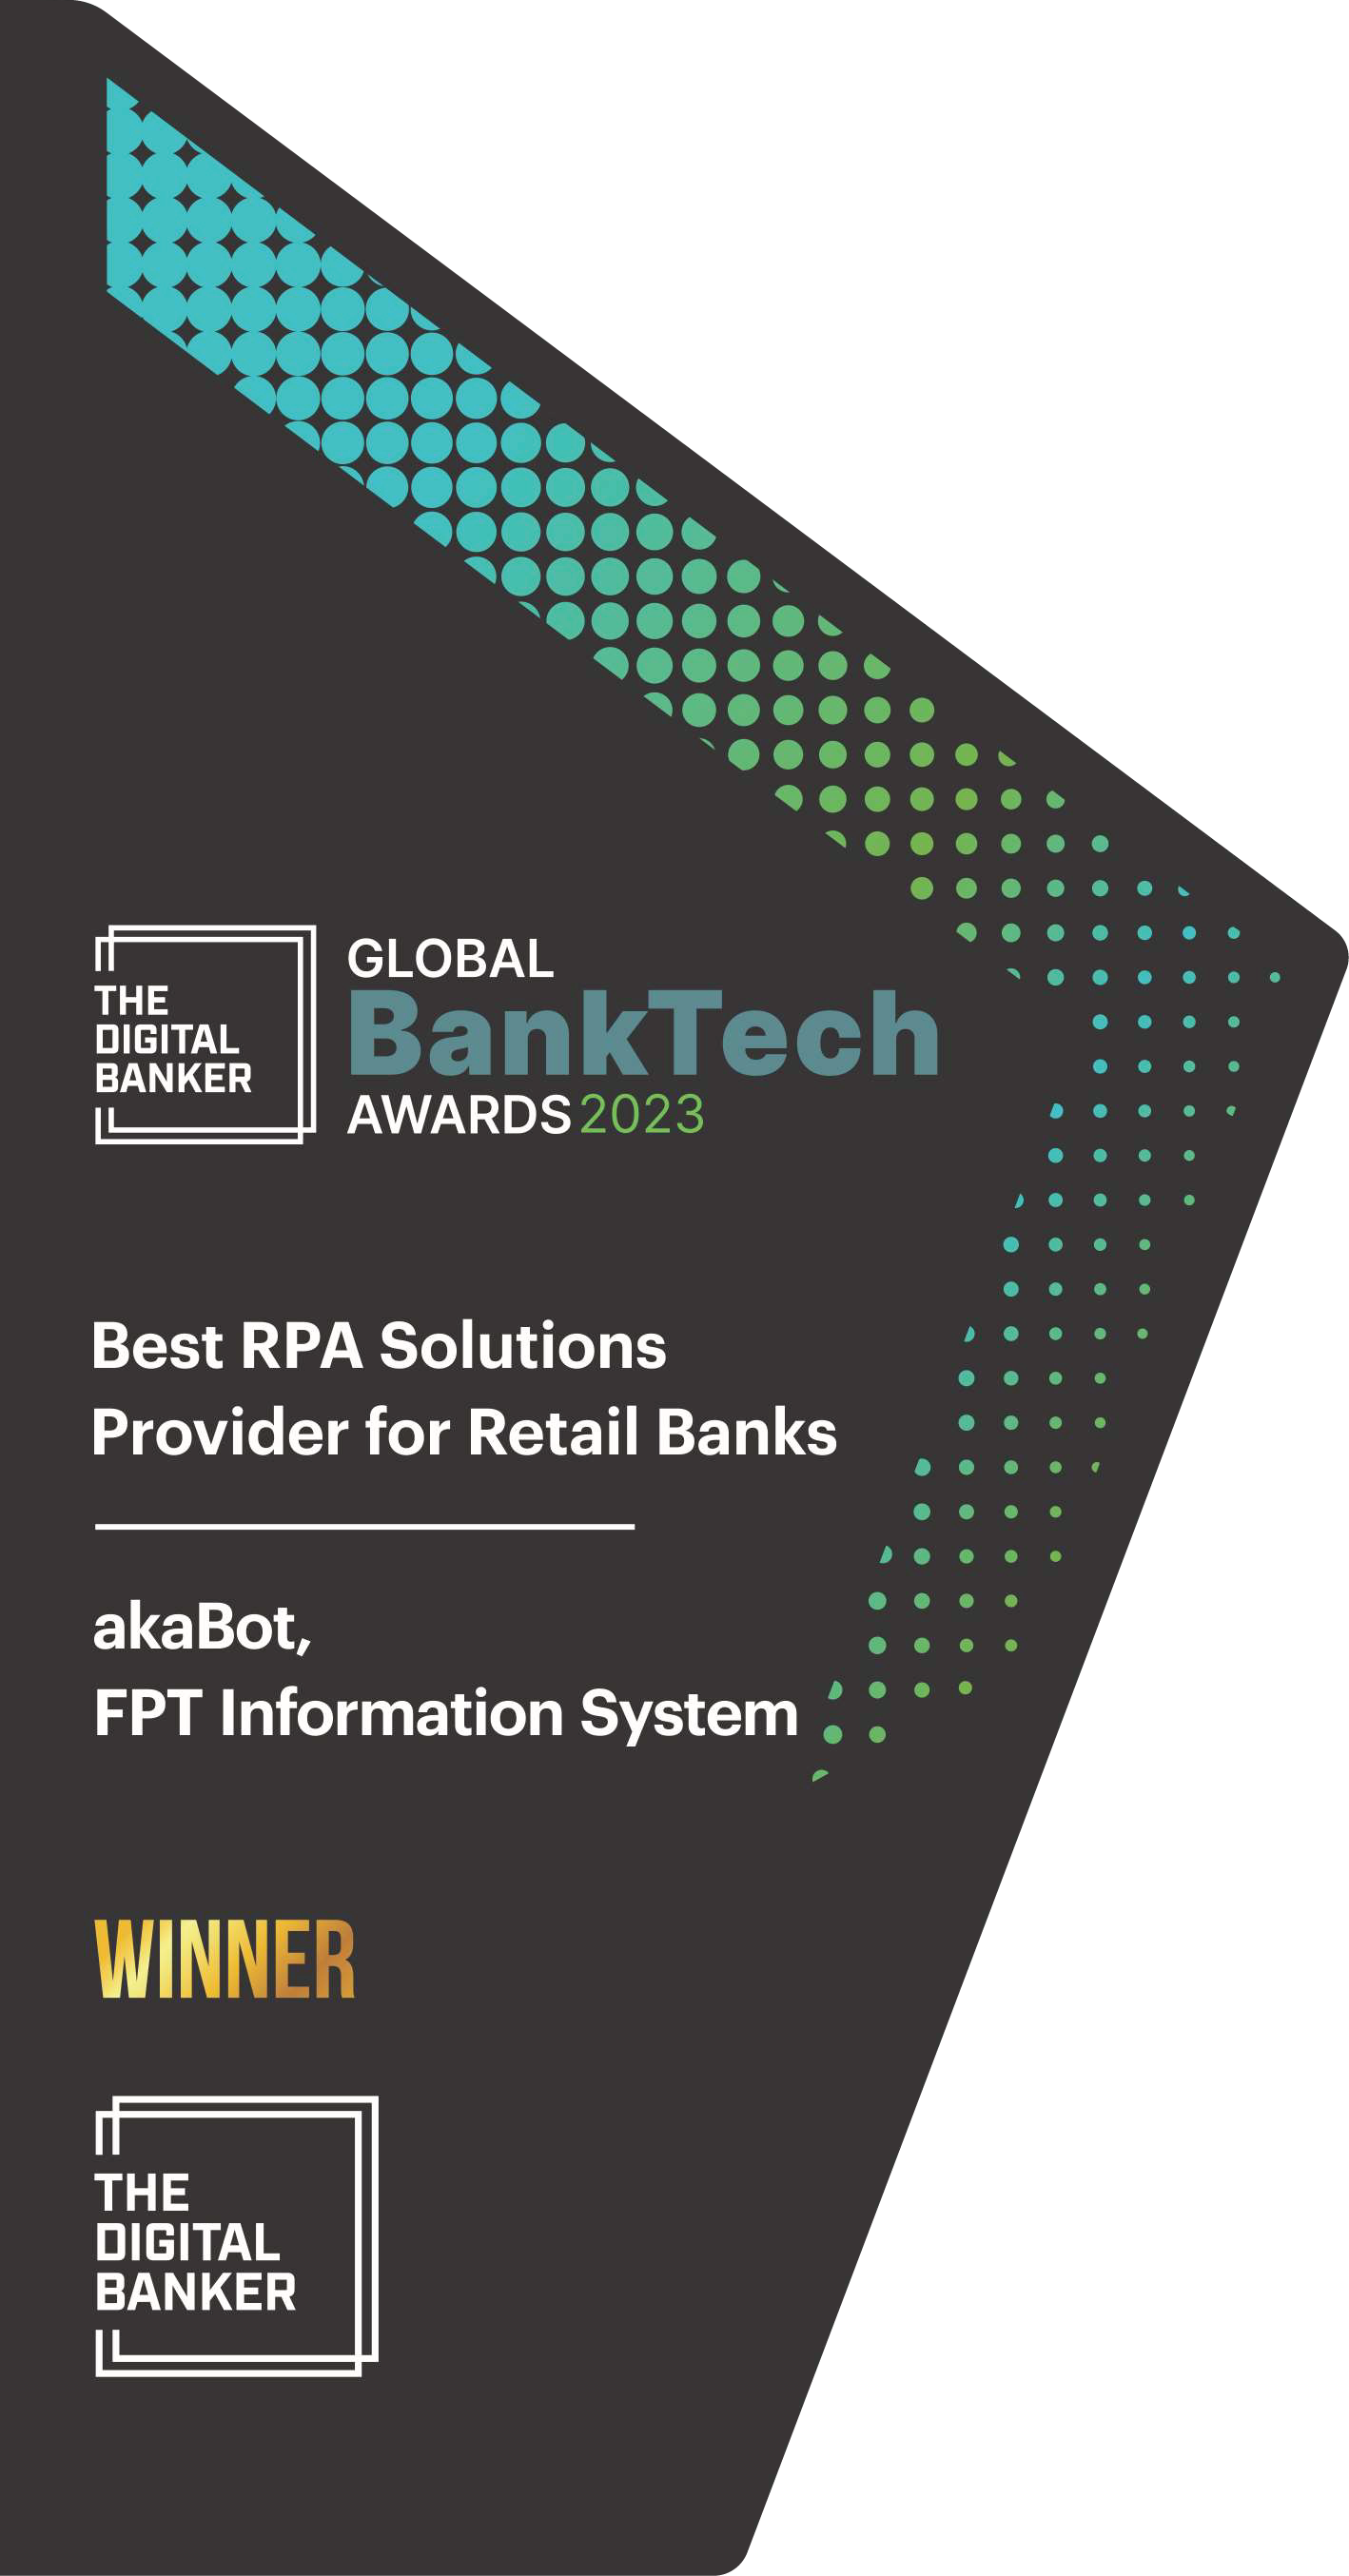 2023 Global BankTech Awards  – Best RPA Solutions Provider for Retail Banks category – Robotic Process Automation (RPA) Solution (akaBot)